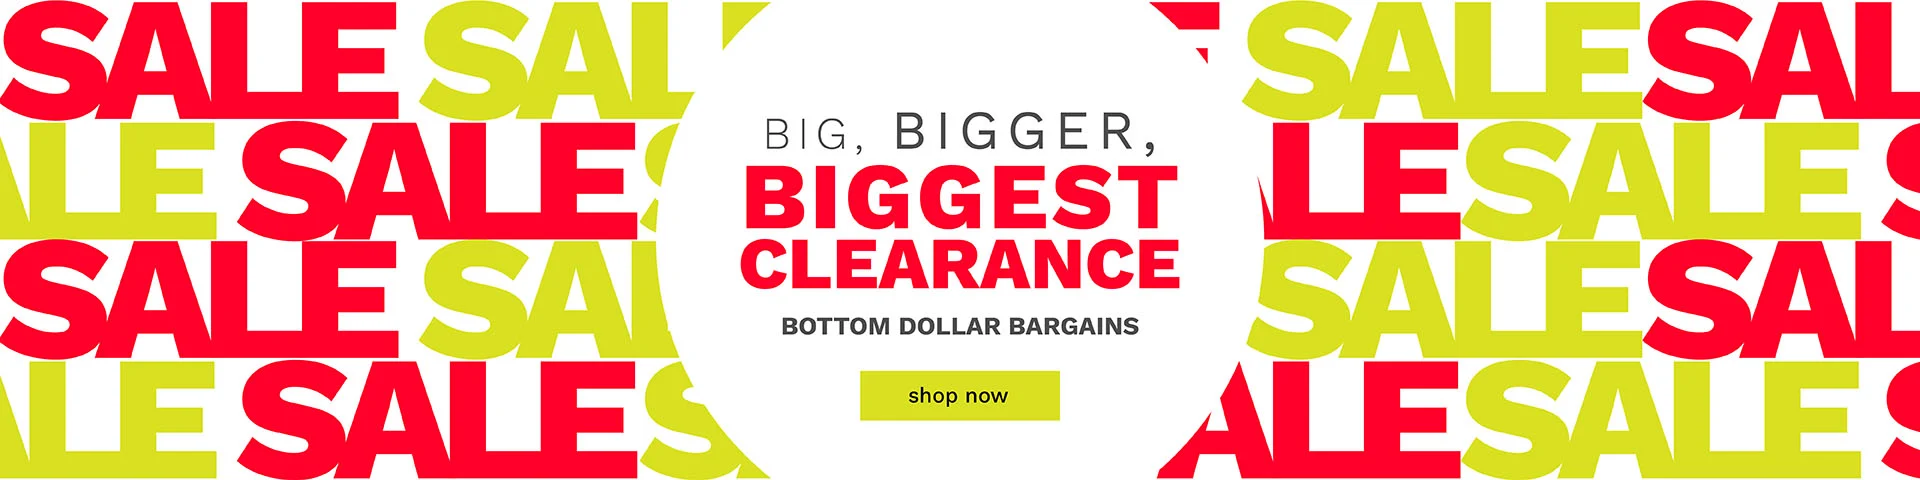 Pushys Biggest clearance Up to 90% OFF on clothing, parts and accessories